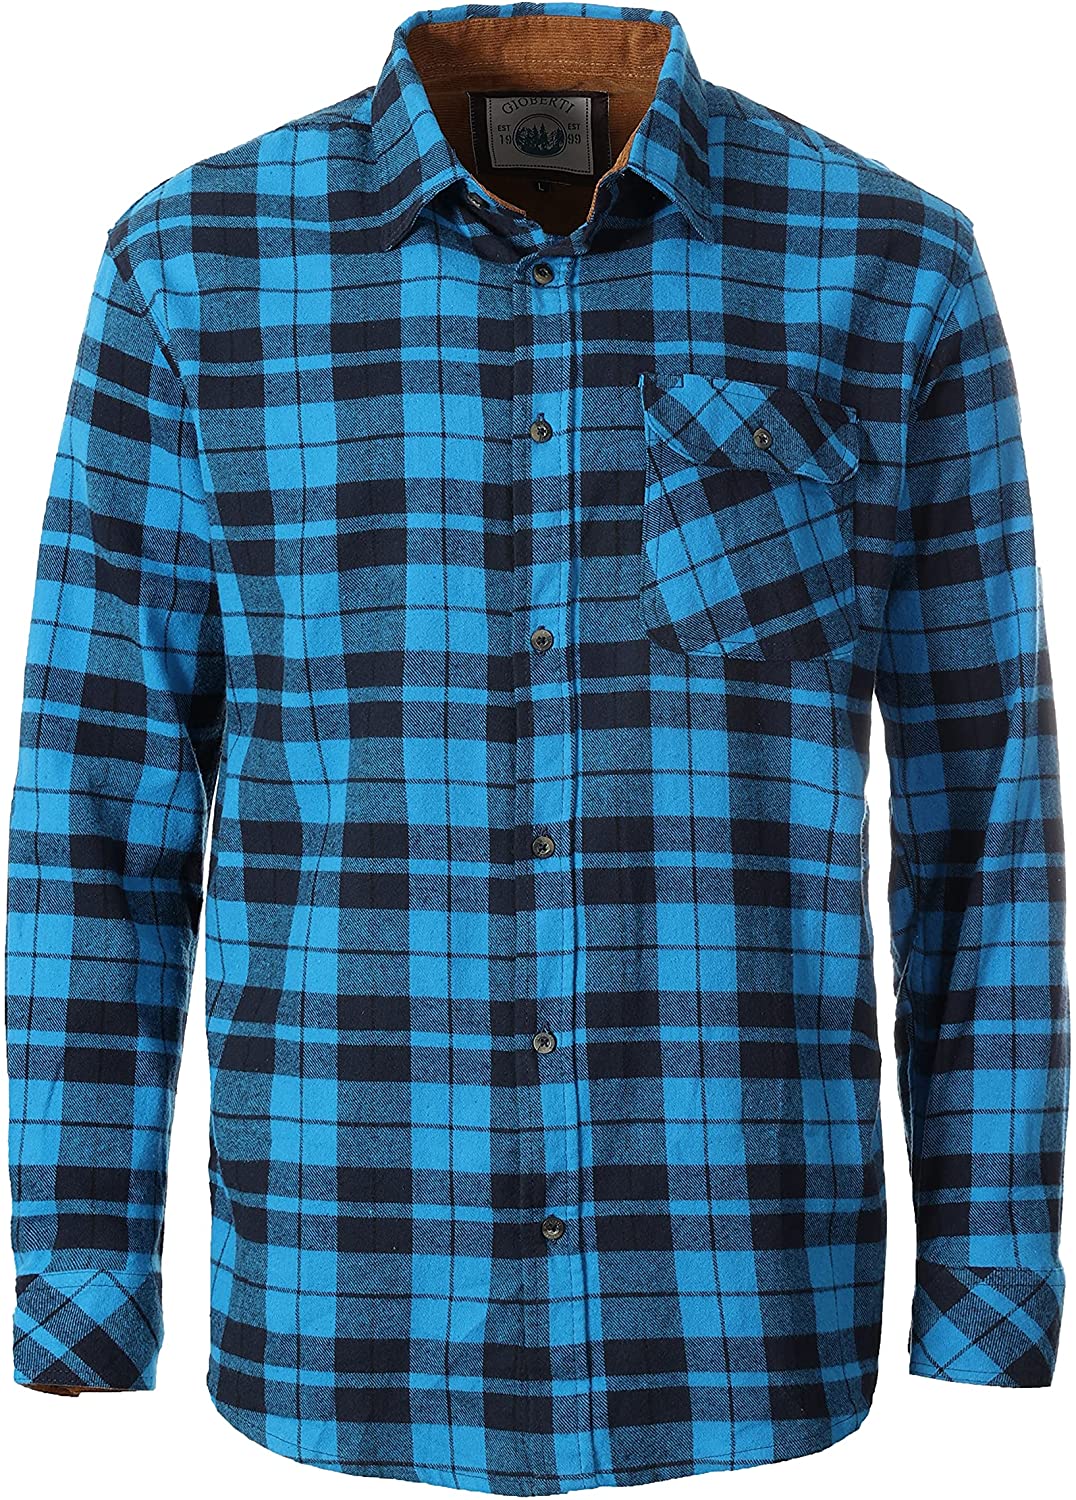 Gioberti Men's 100% Cotton Brushed Flannel Plaid Checkered Shirt with Corduroy Contrast 